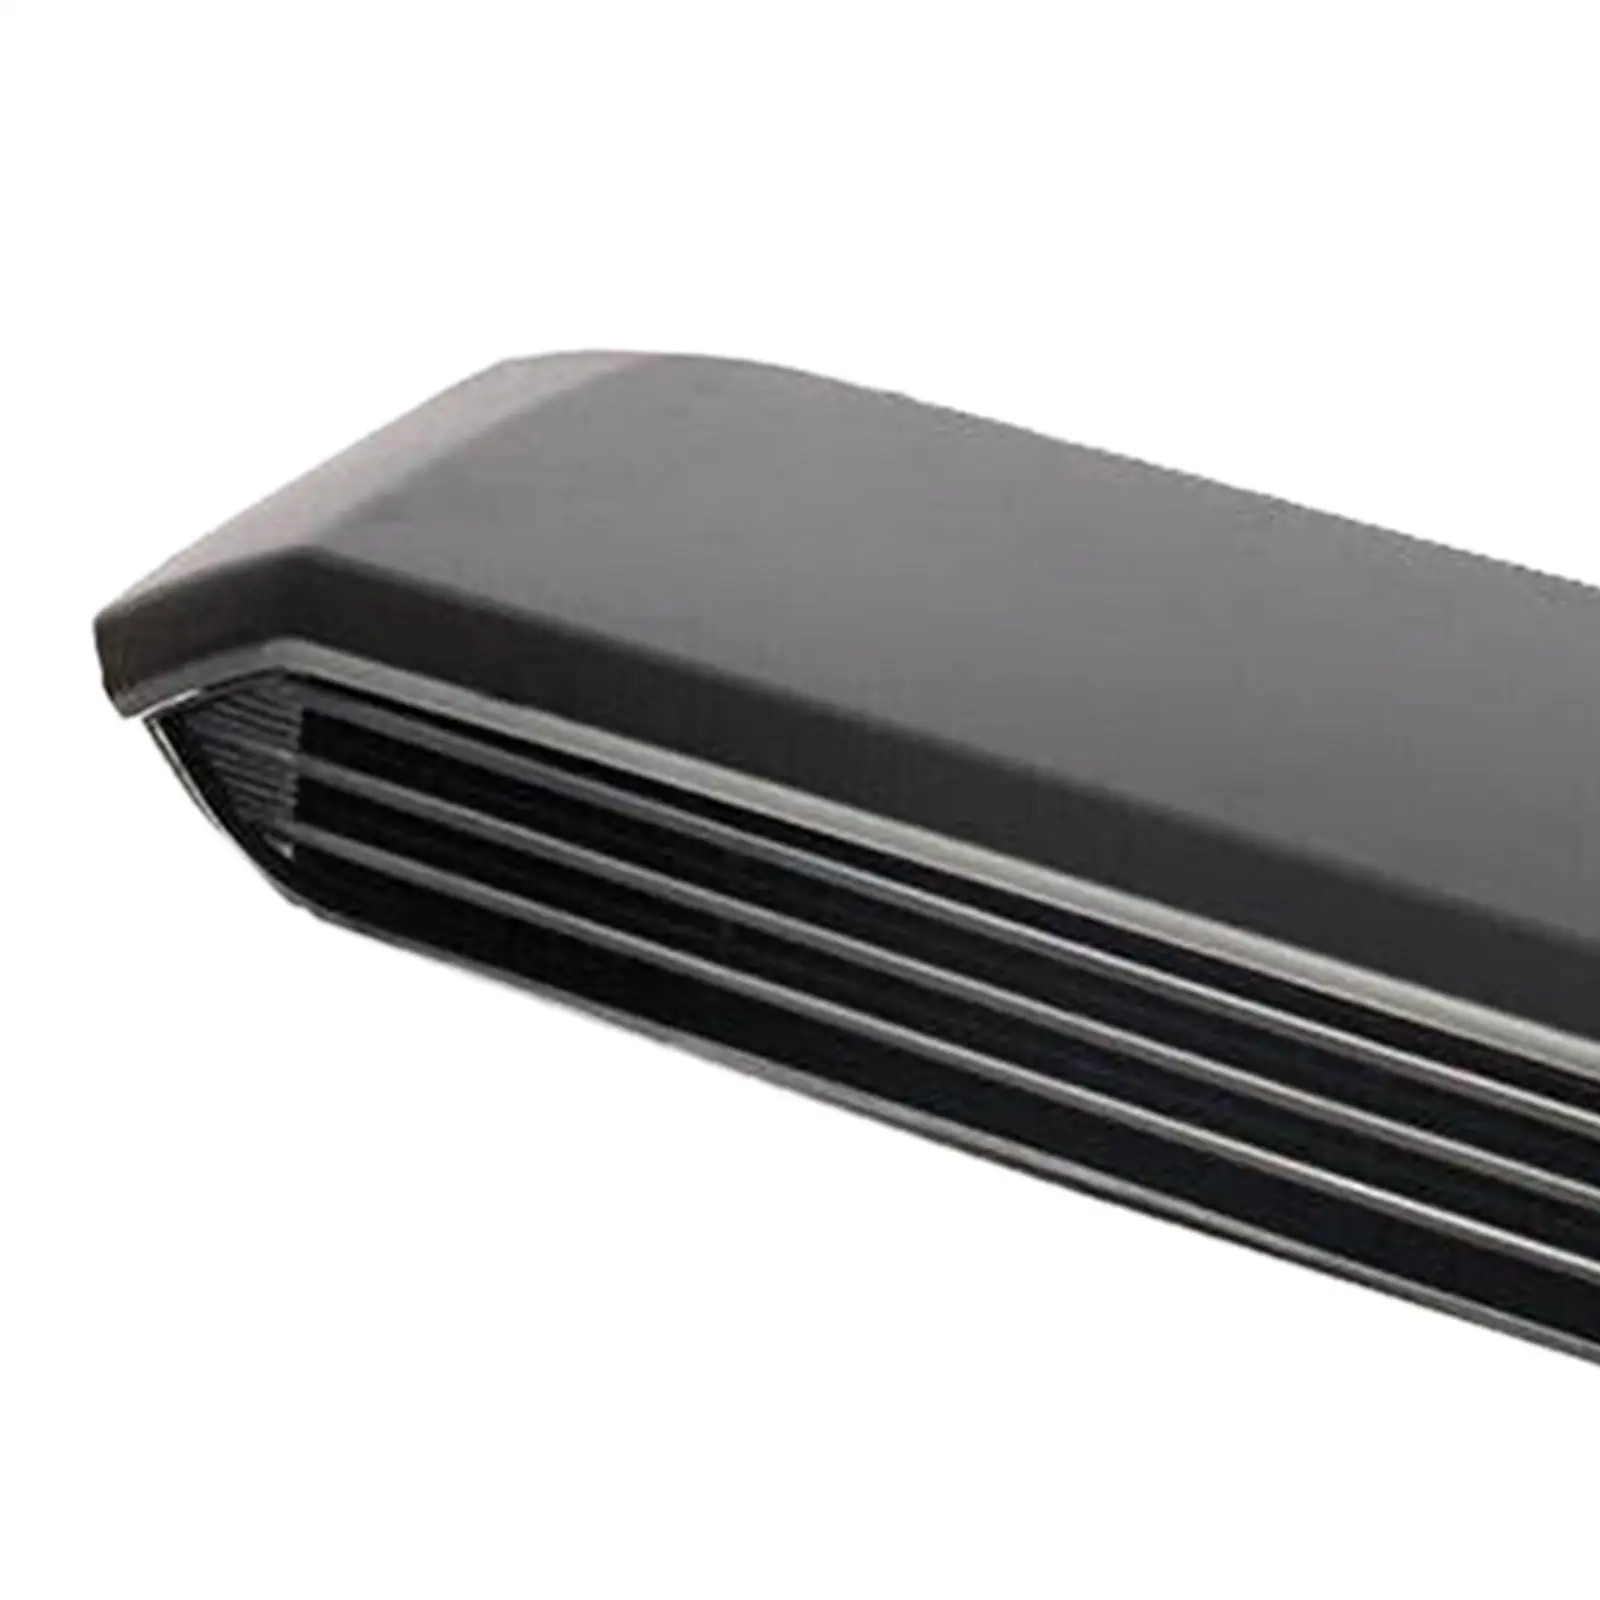 Hood Scoop Kit High Performance 76181-04900 for Toyota for tacoma 2016-2022